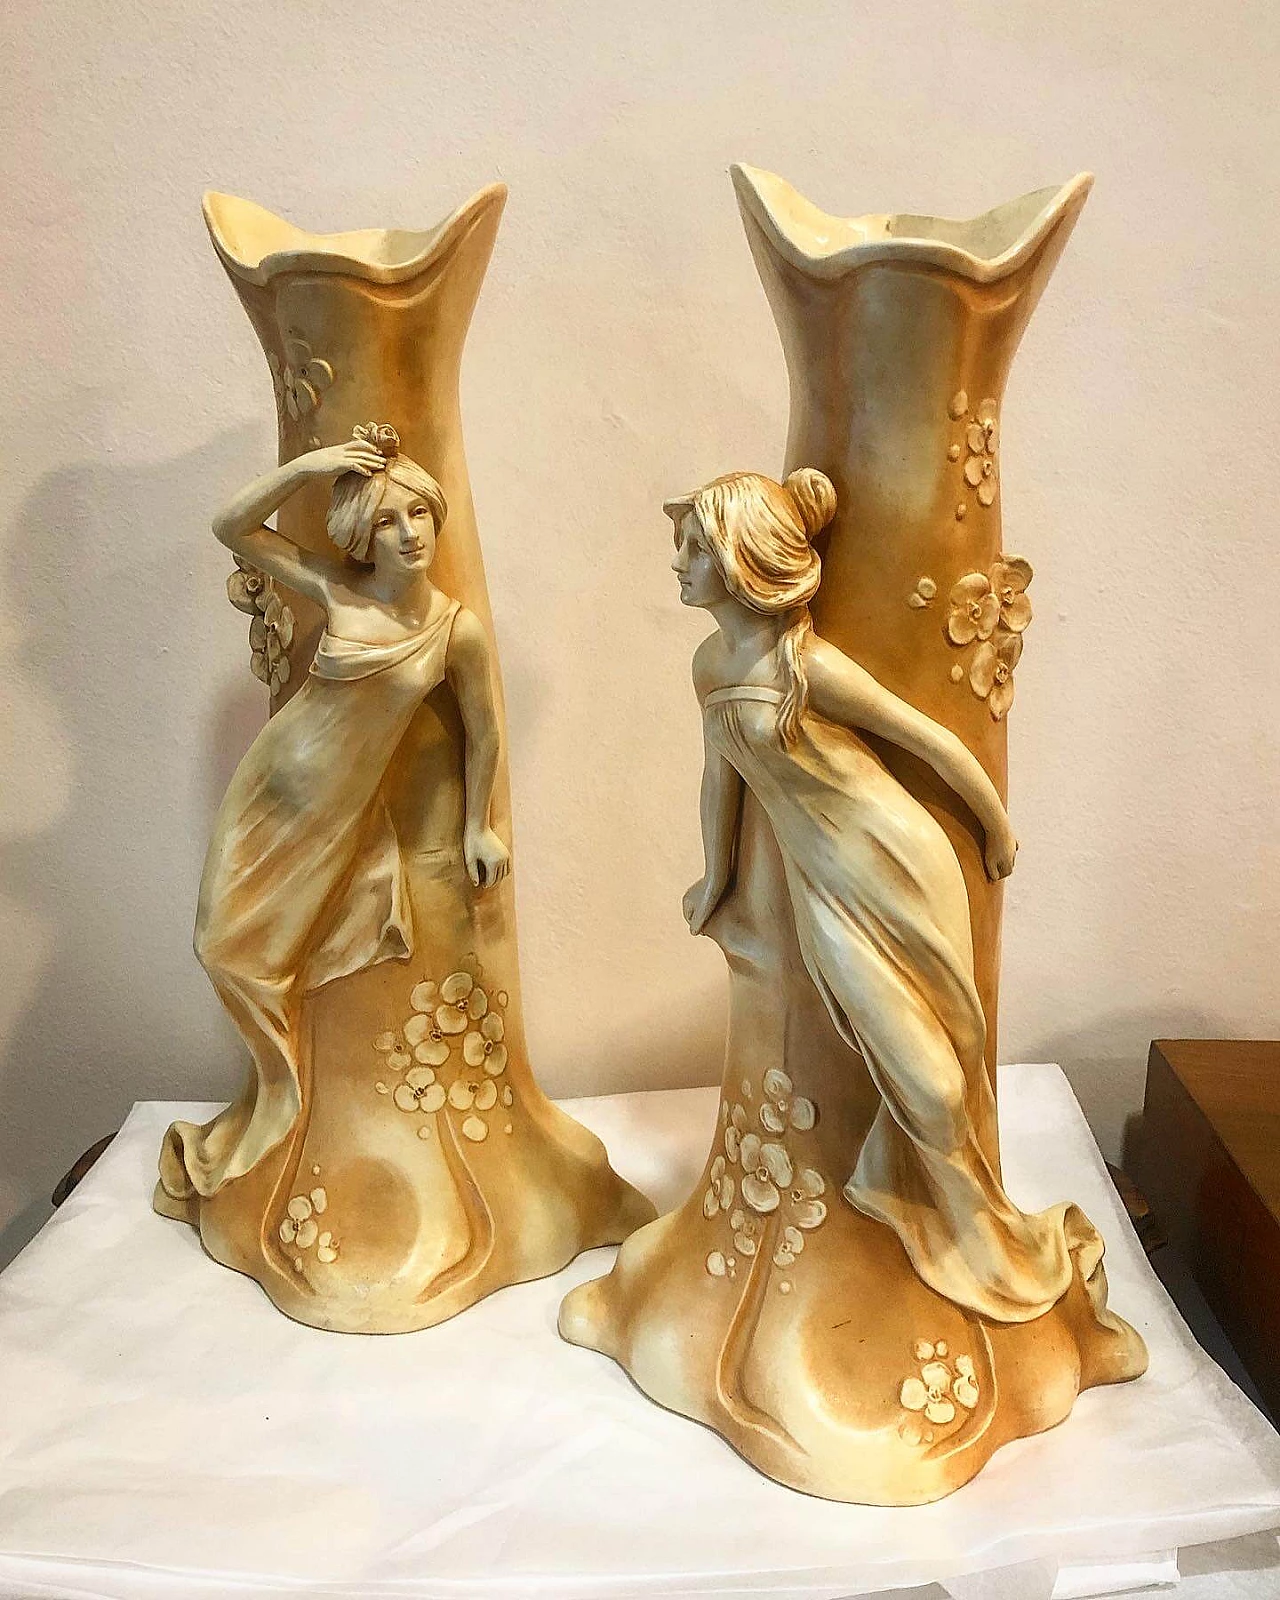 Pair of Art Nouveau sculpture vases by Bernhard Bloch, early 20th century 1250620